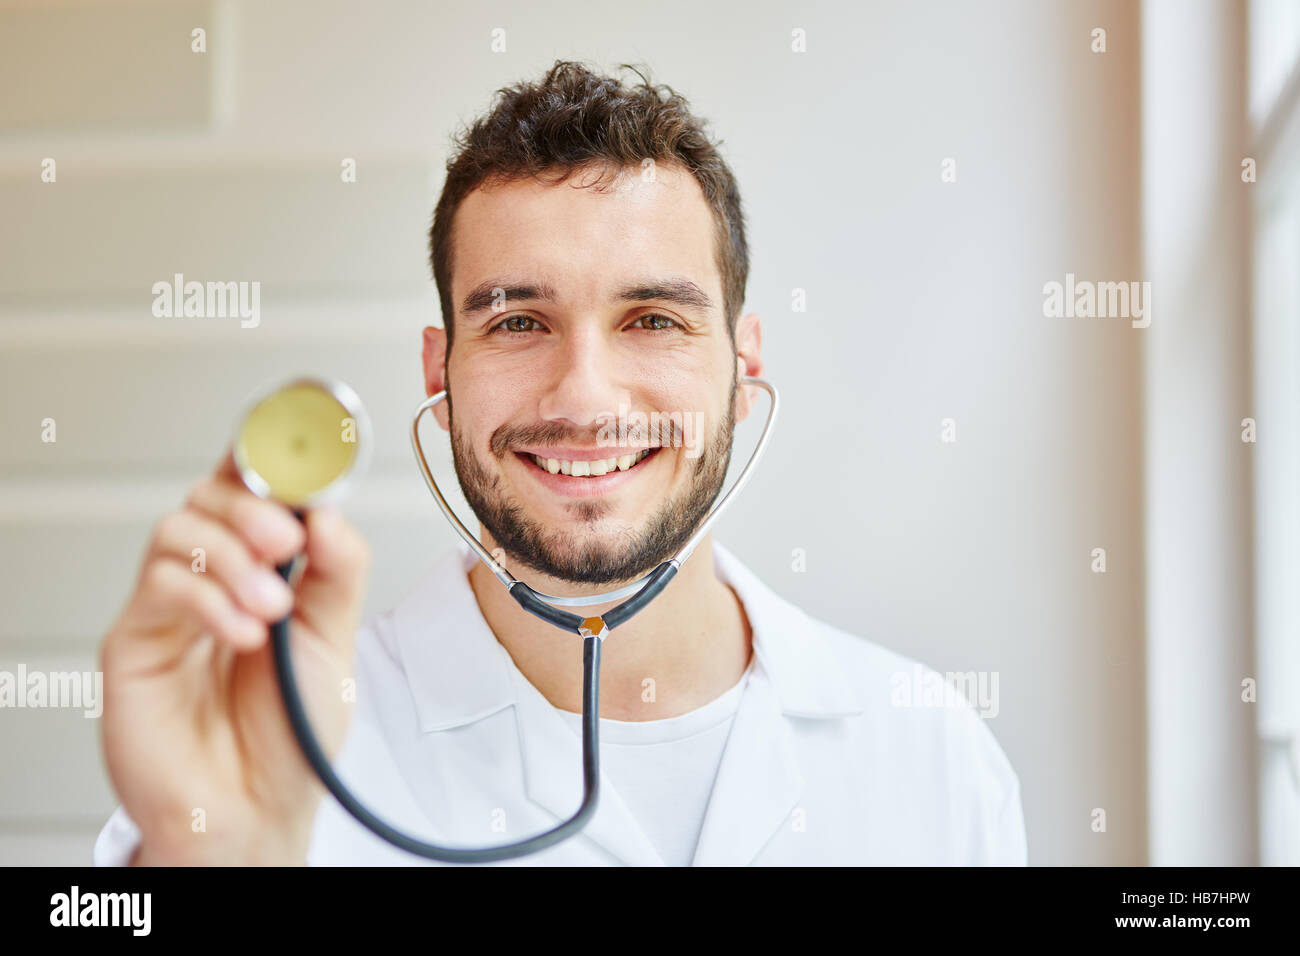 Medical specialist with stethoscope smiling Stock Photo